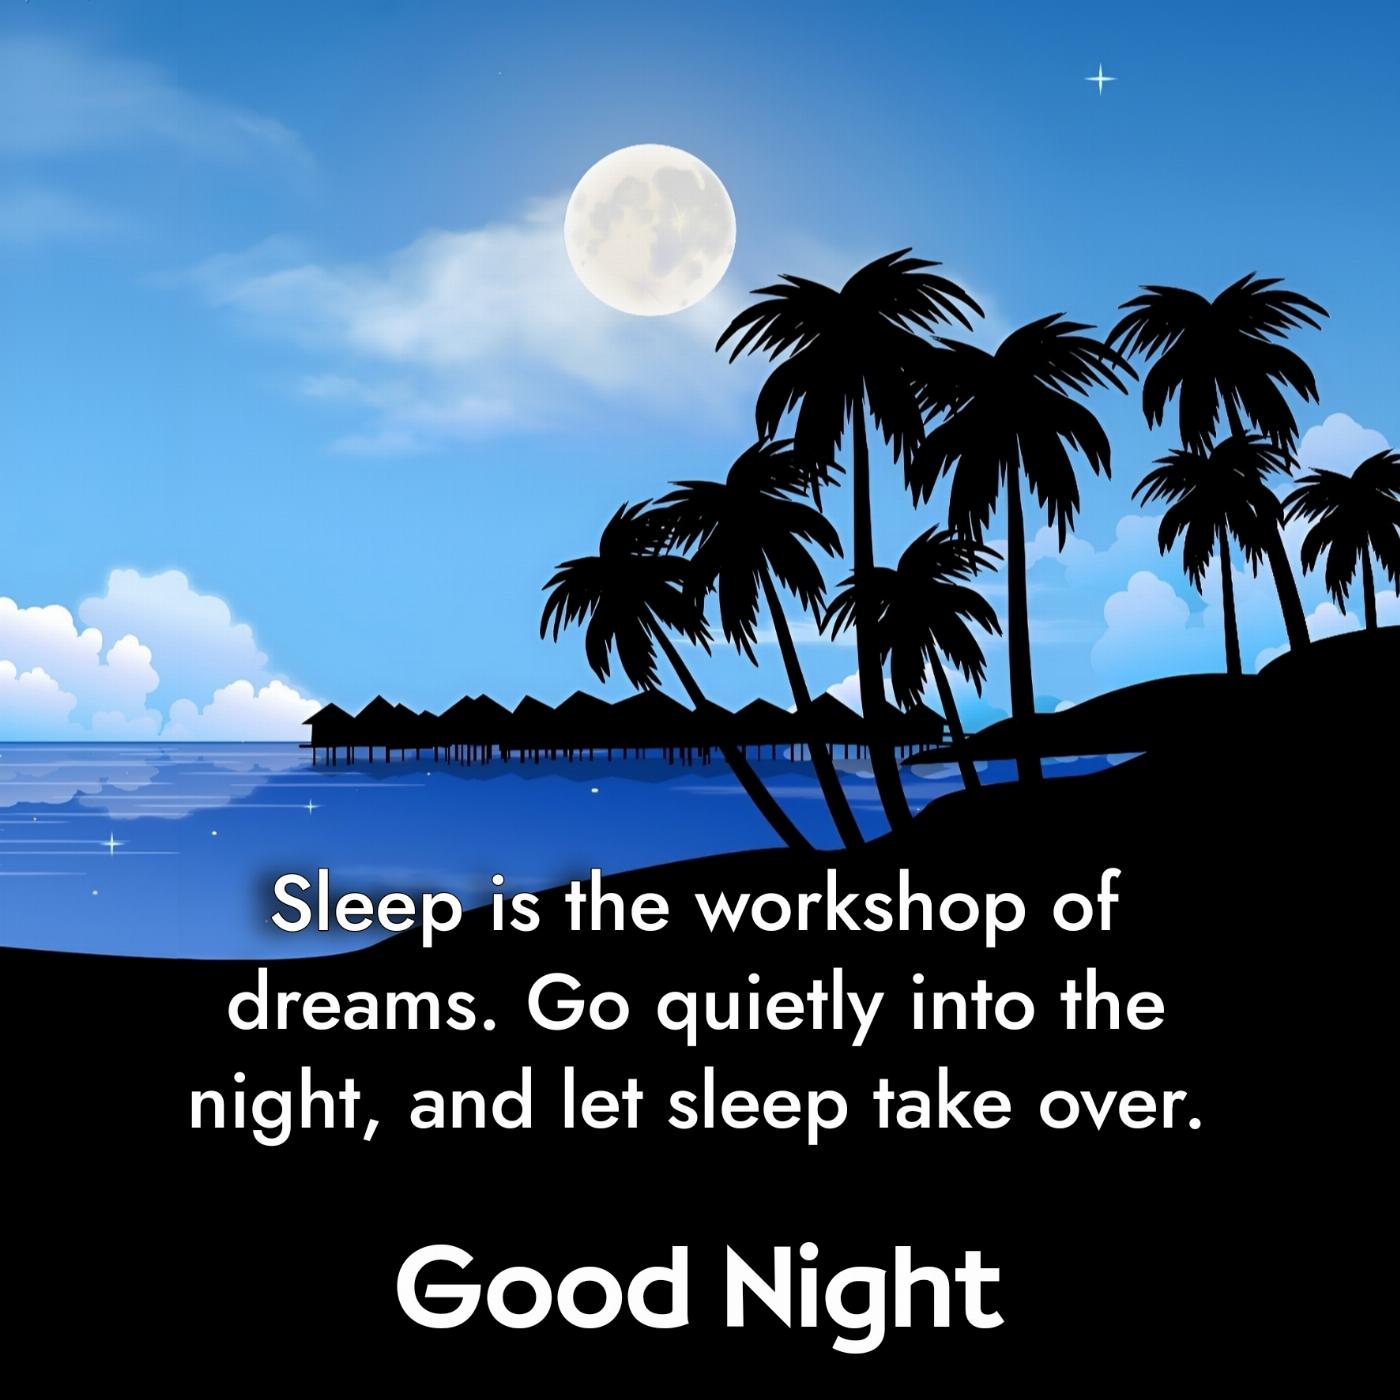 Sleep is the workshop of dreams Go quietly into the night